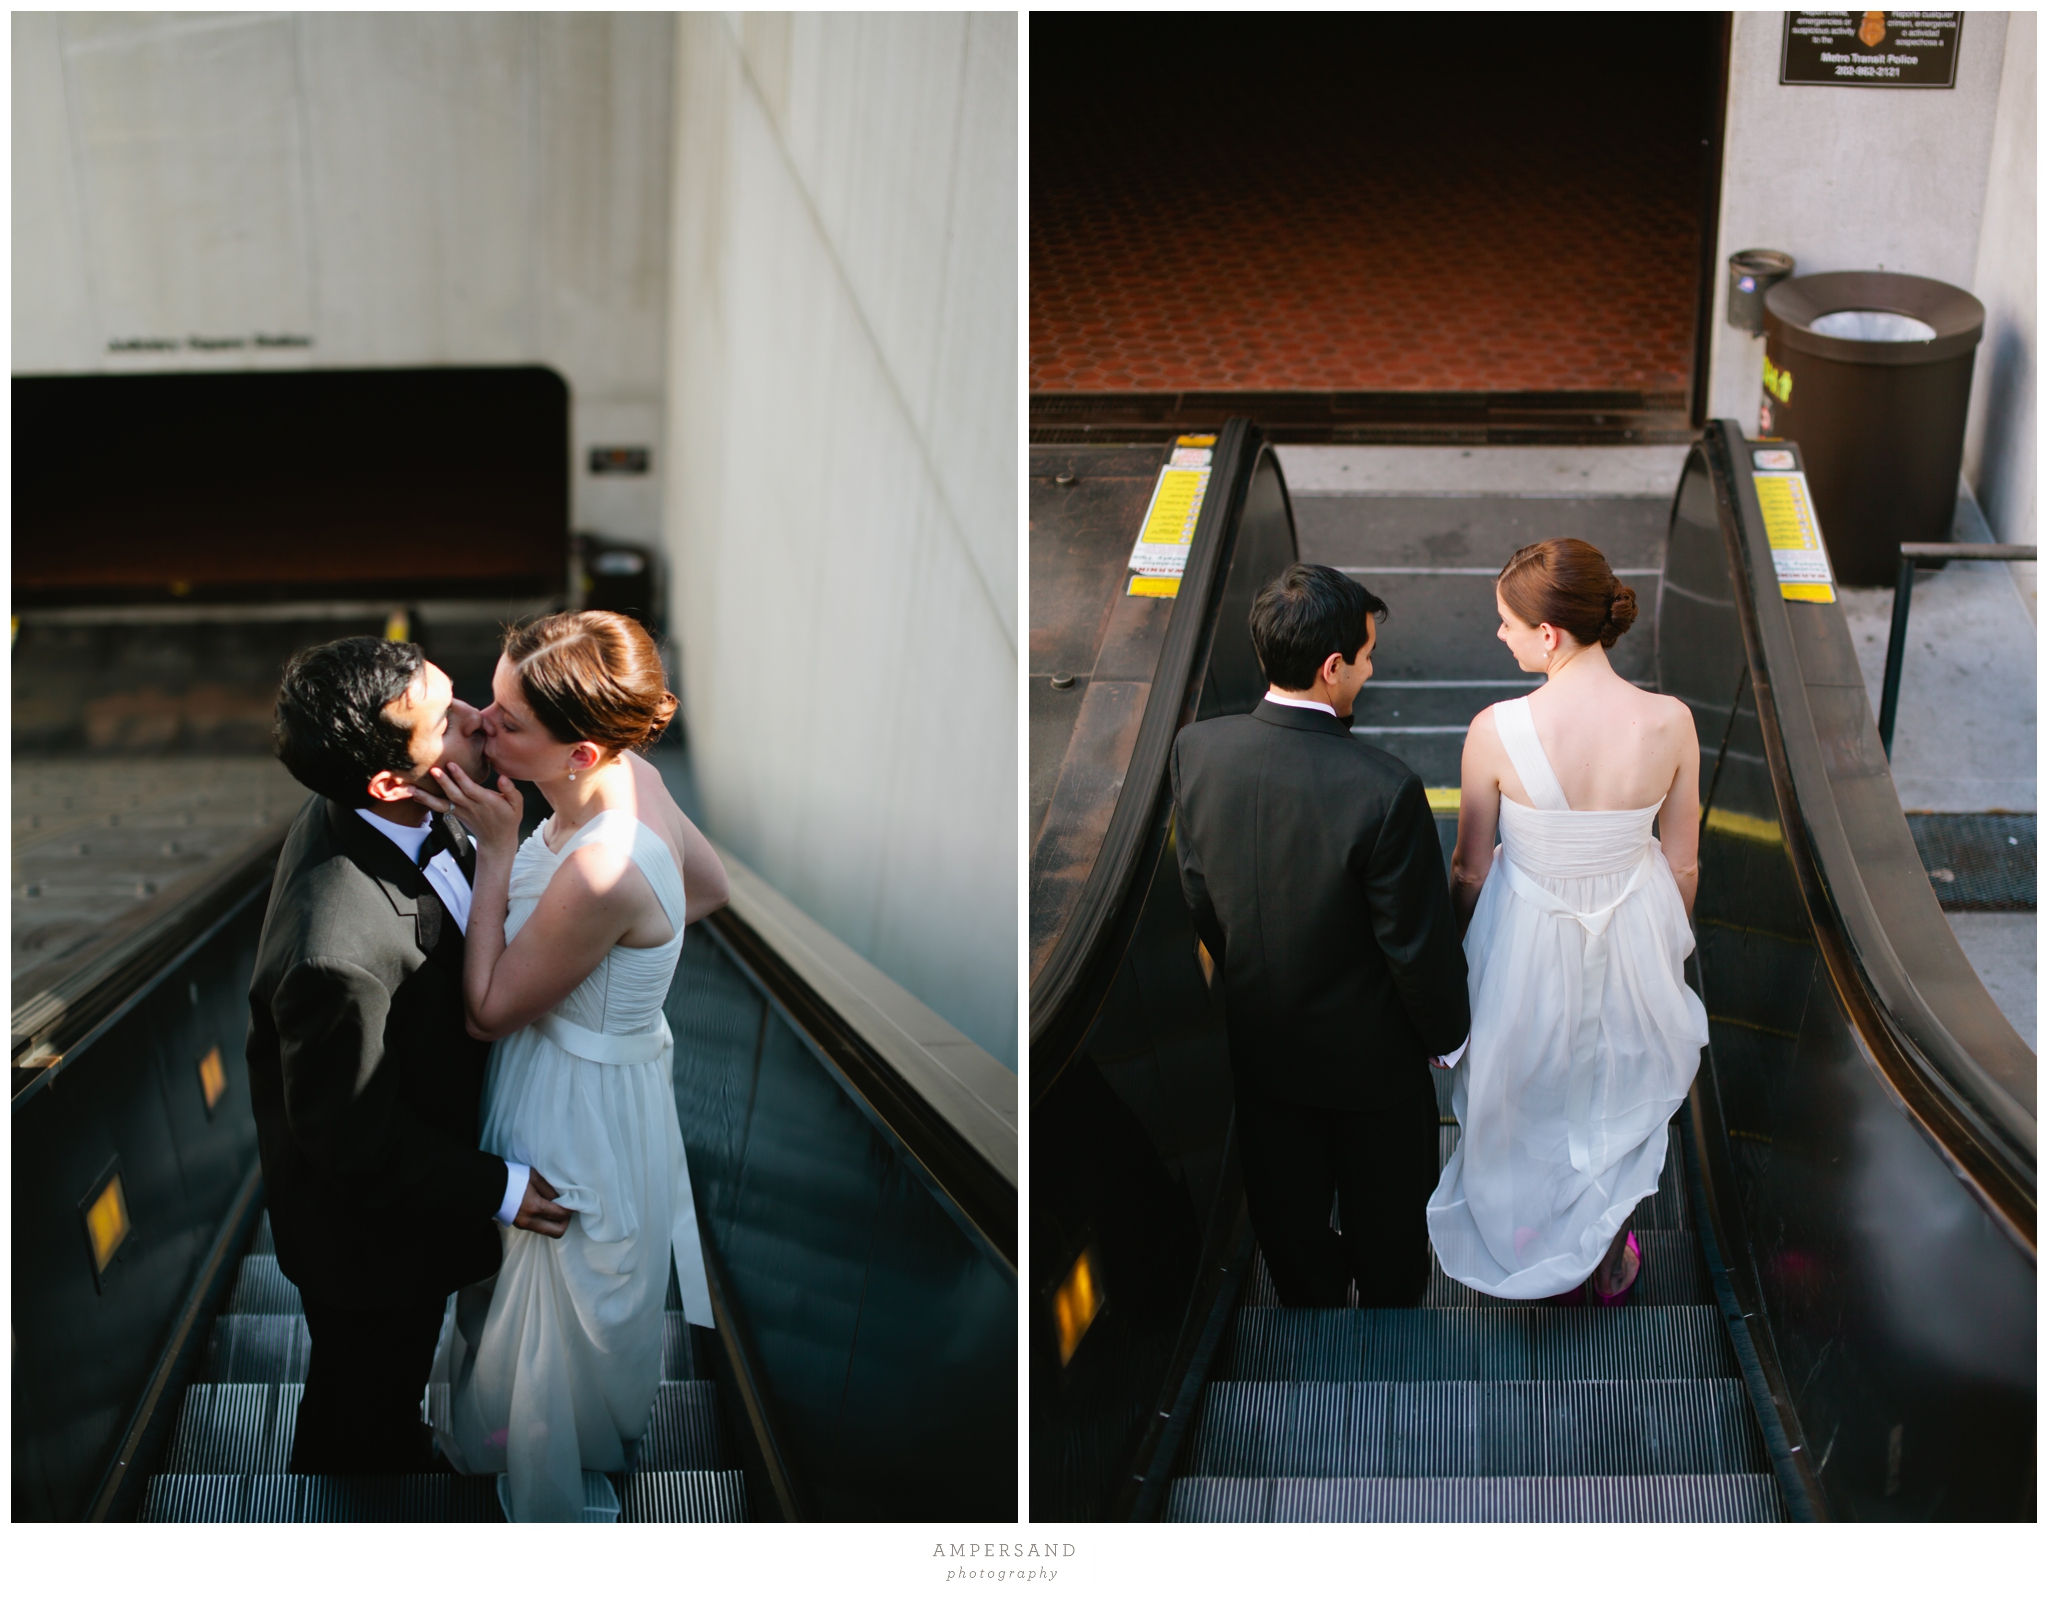 DC metro wedding portraits  // Photos by Ampersand Photography